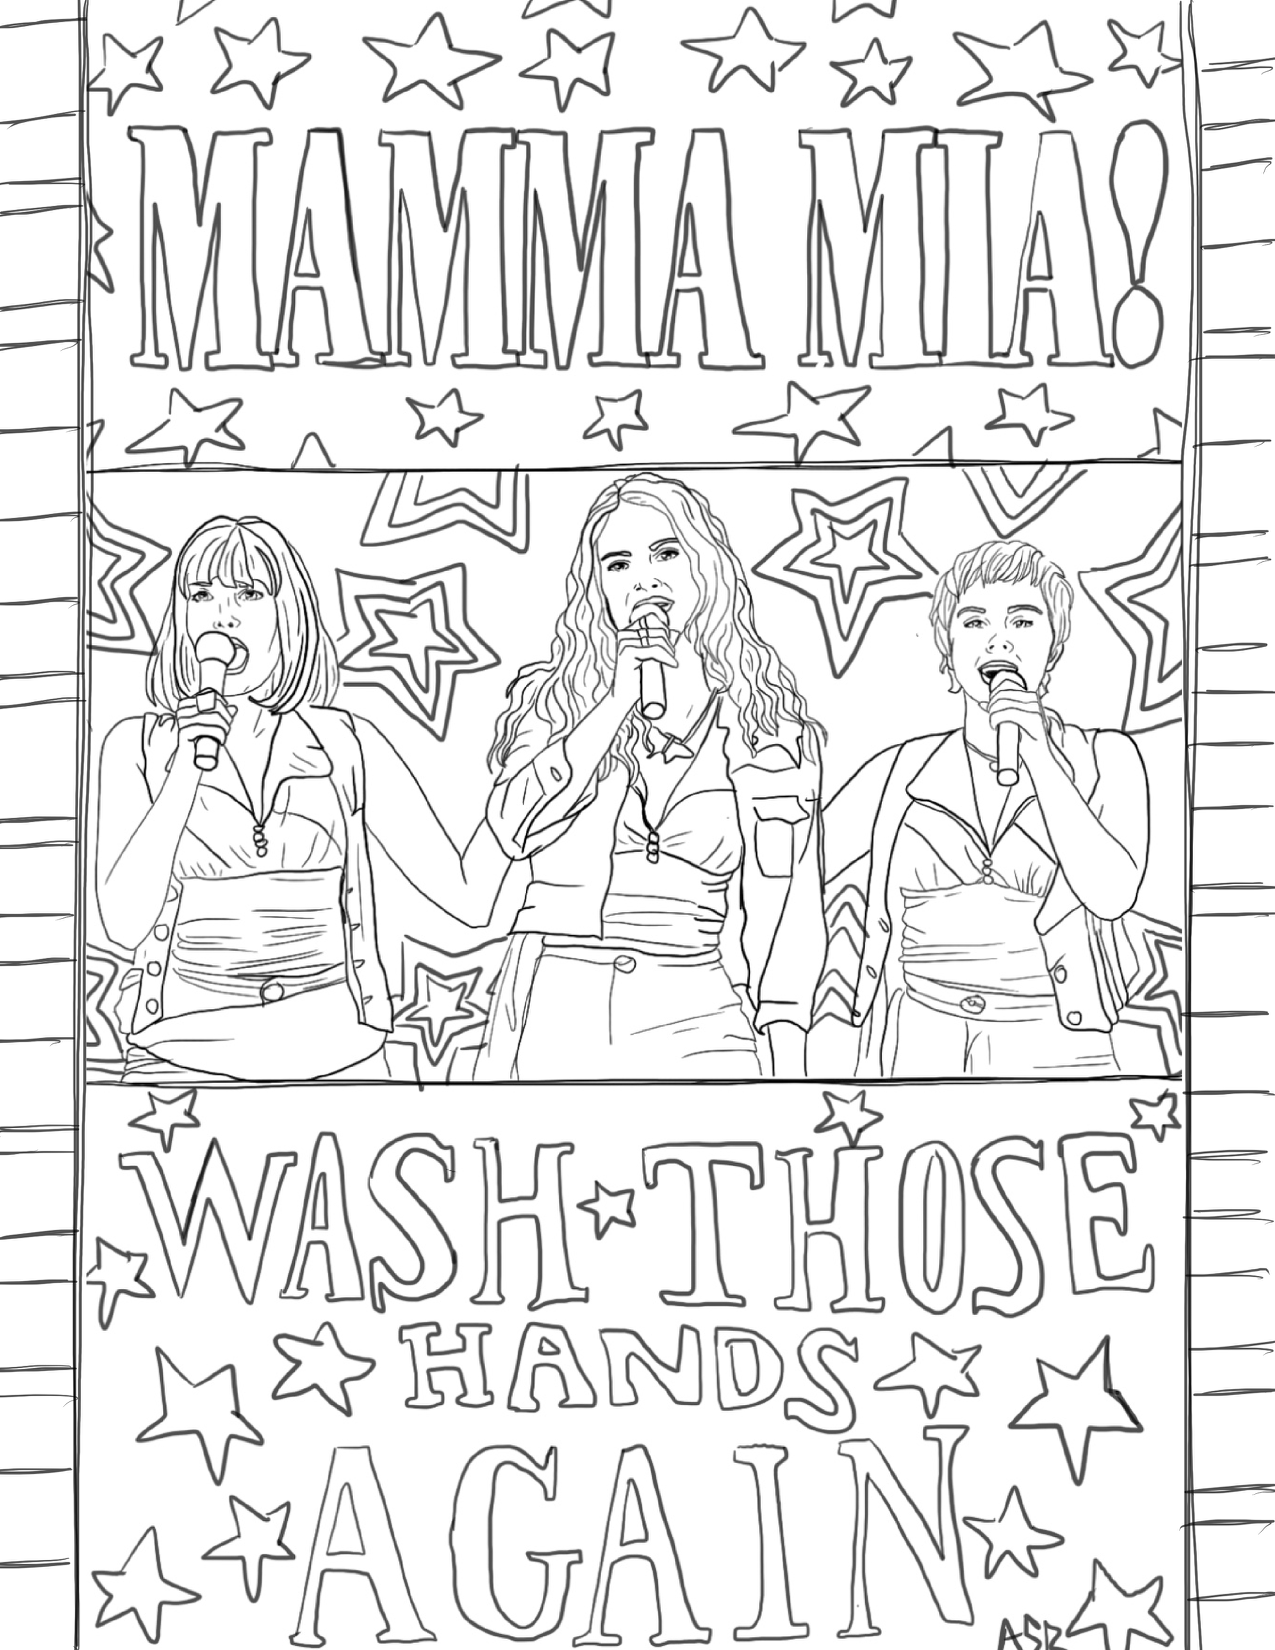 Mamma Mia Coloring Pages Printed on matte card stock. 8 1/2 x 11 - Set of 4 individual designs Hand-drawn illustrations by Coloring Broadway 